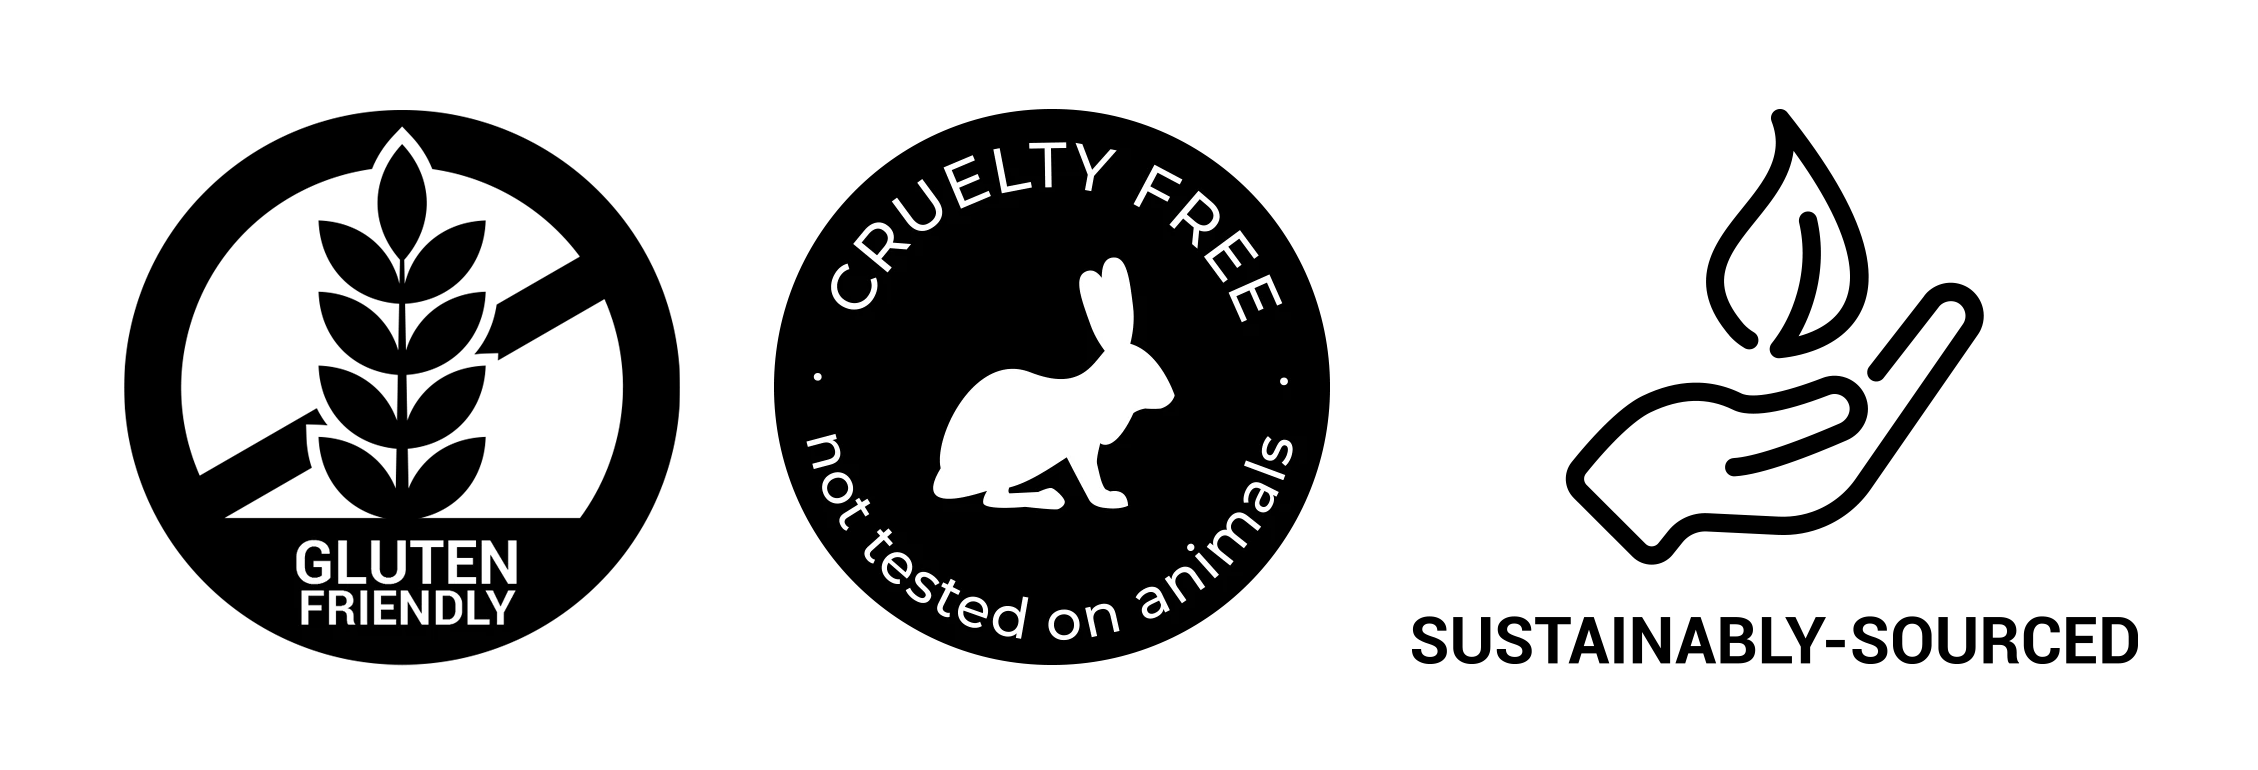 cruelty free and sustainably sourced